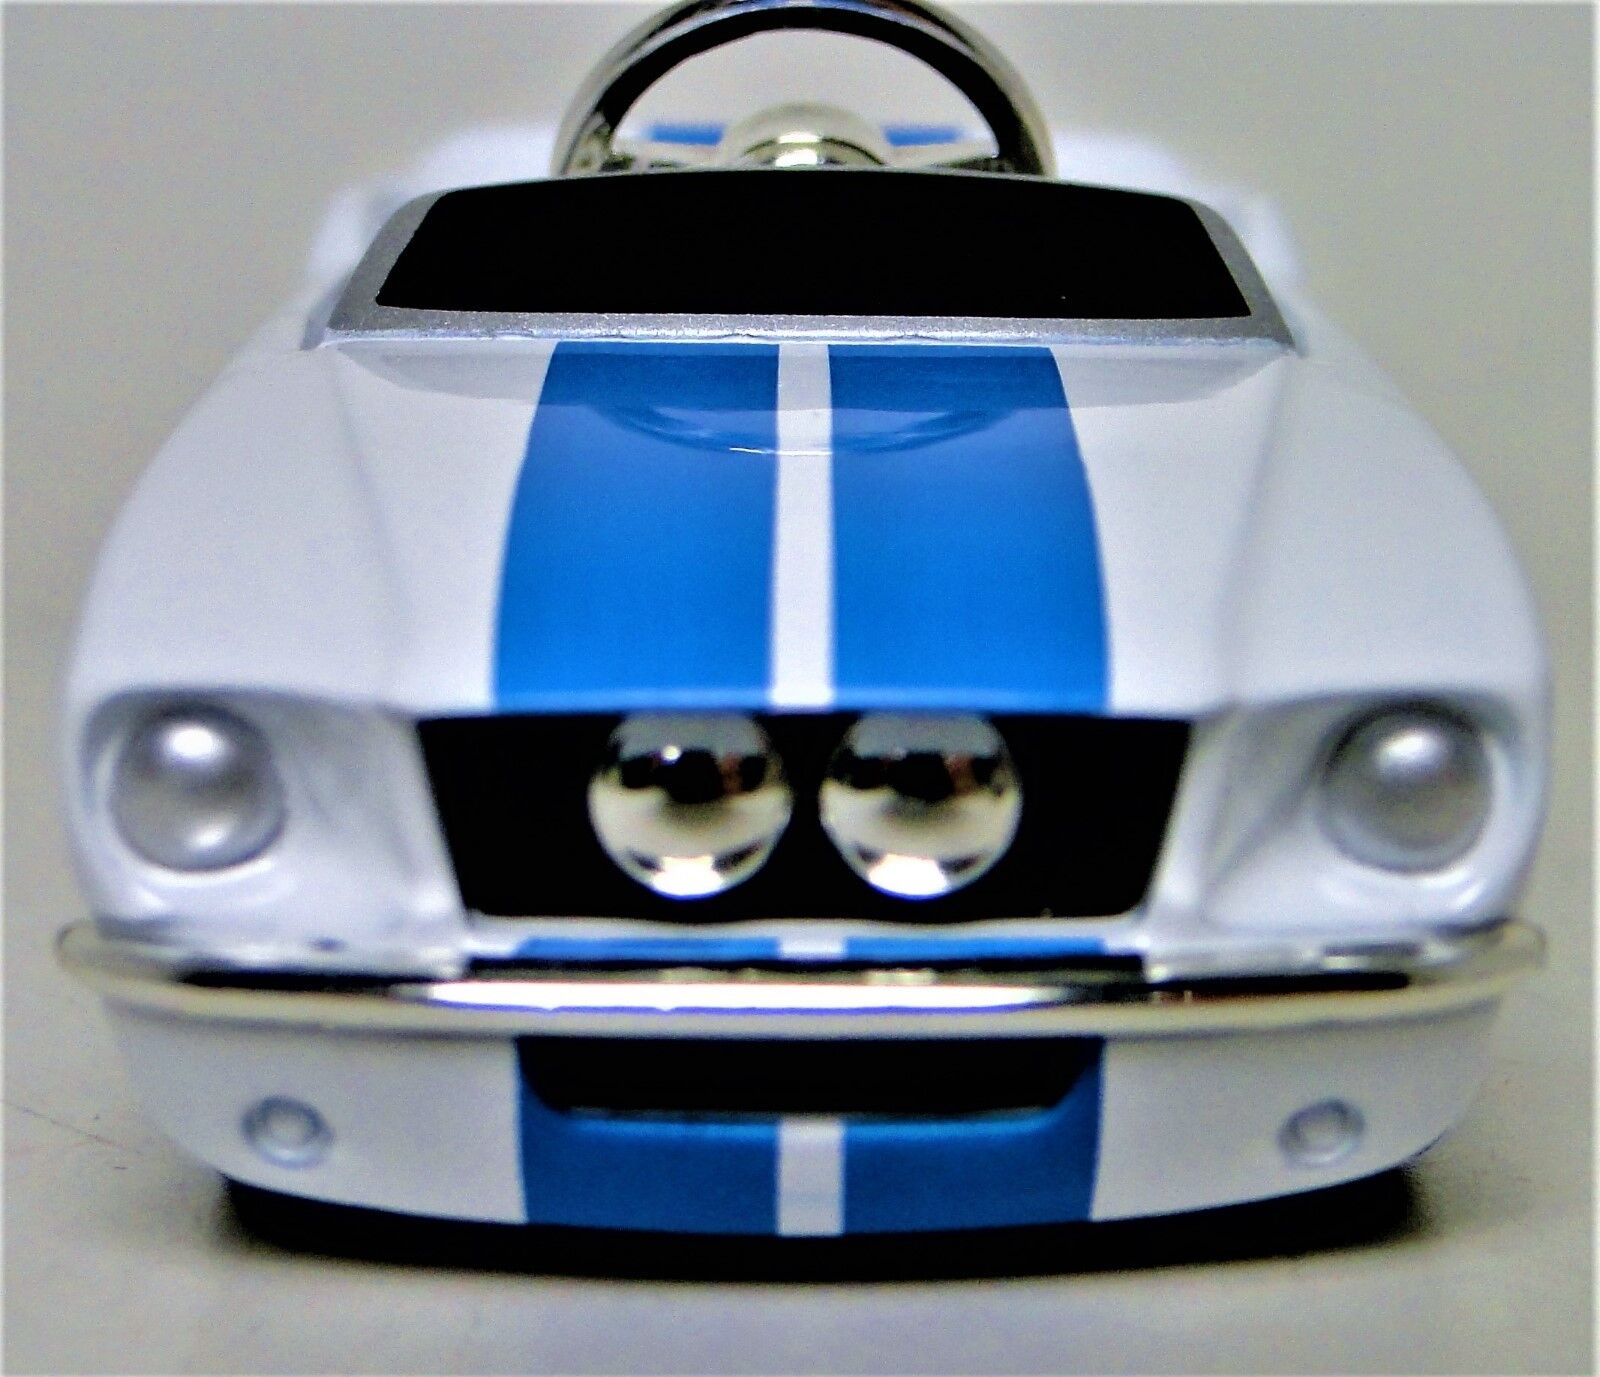 Pedal Car Ford Mustang 1966 Metal Body Vintage White Collector >Length: 3 Inches